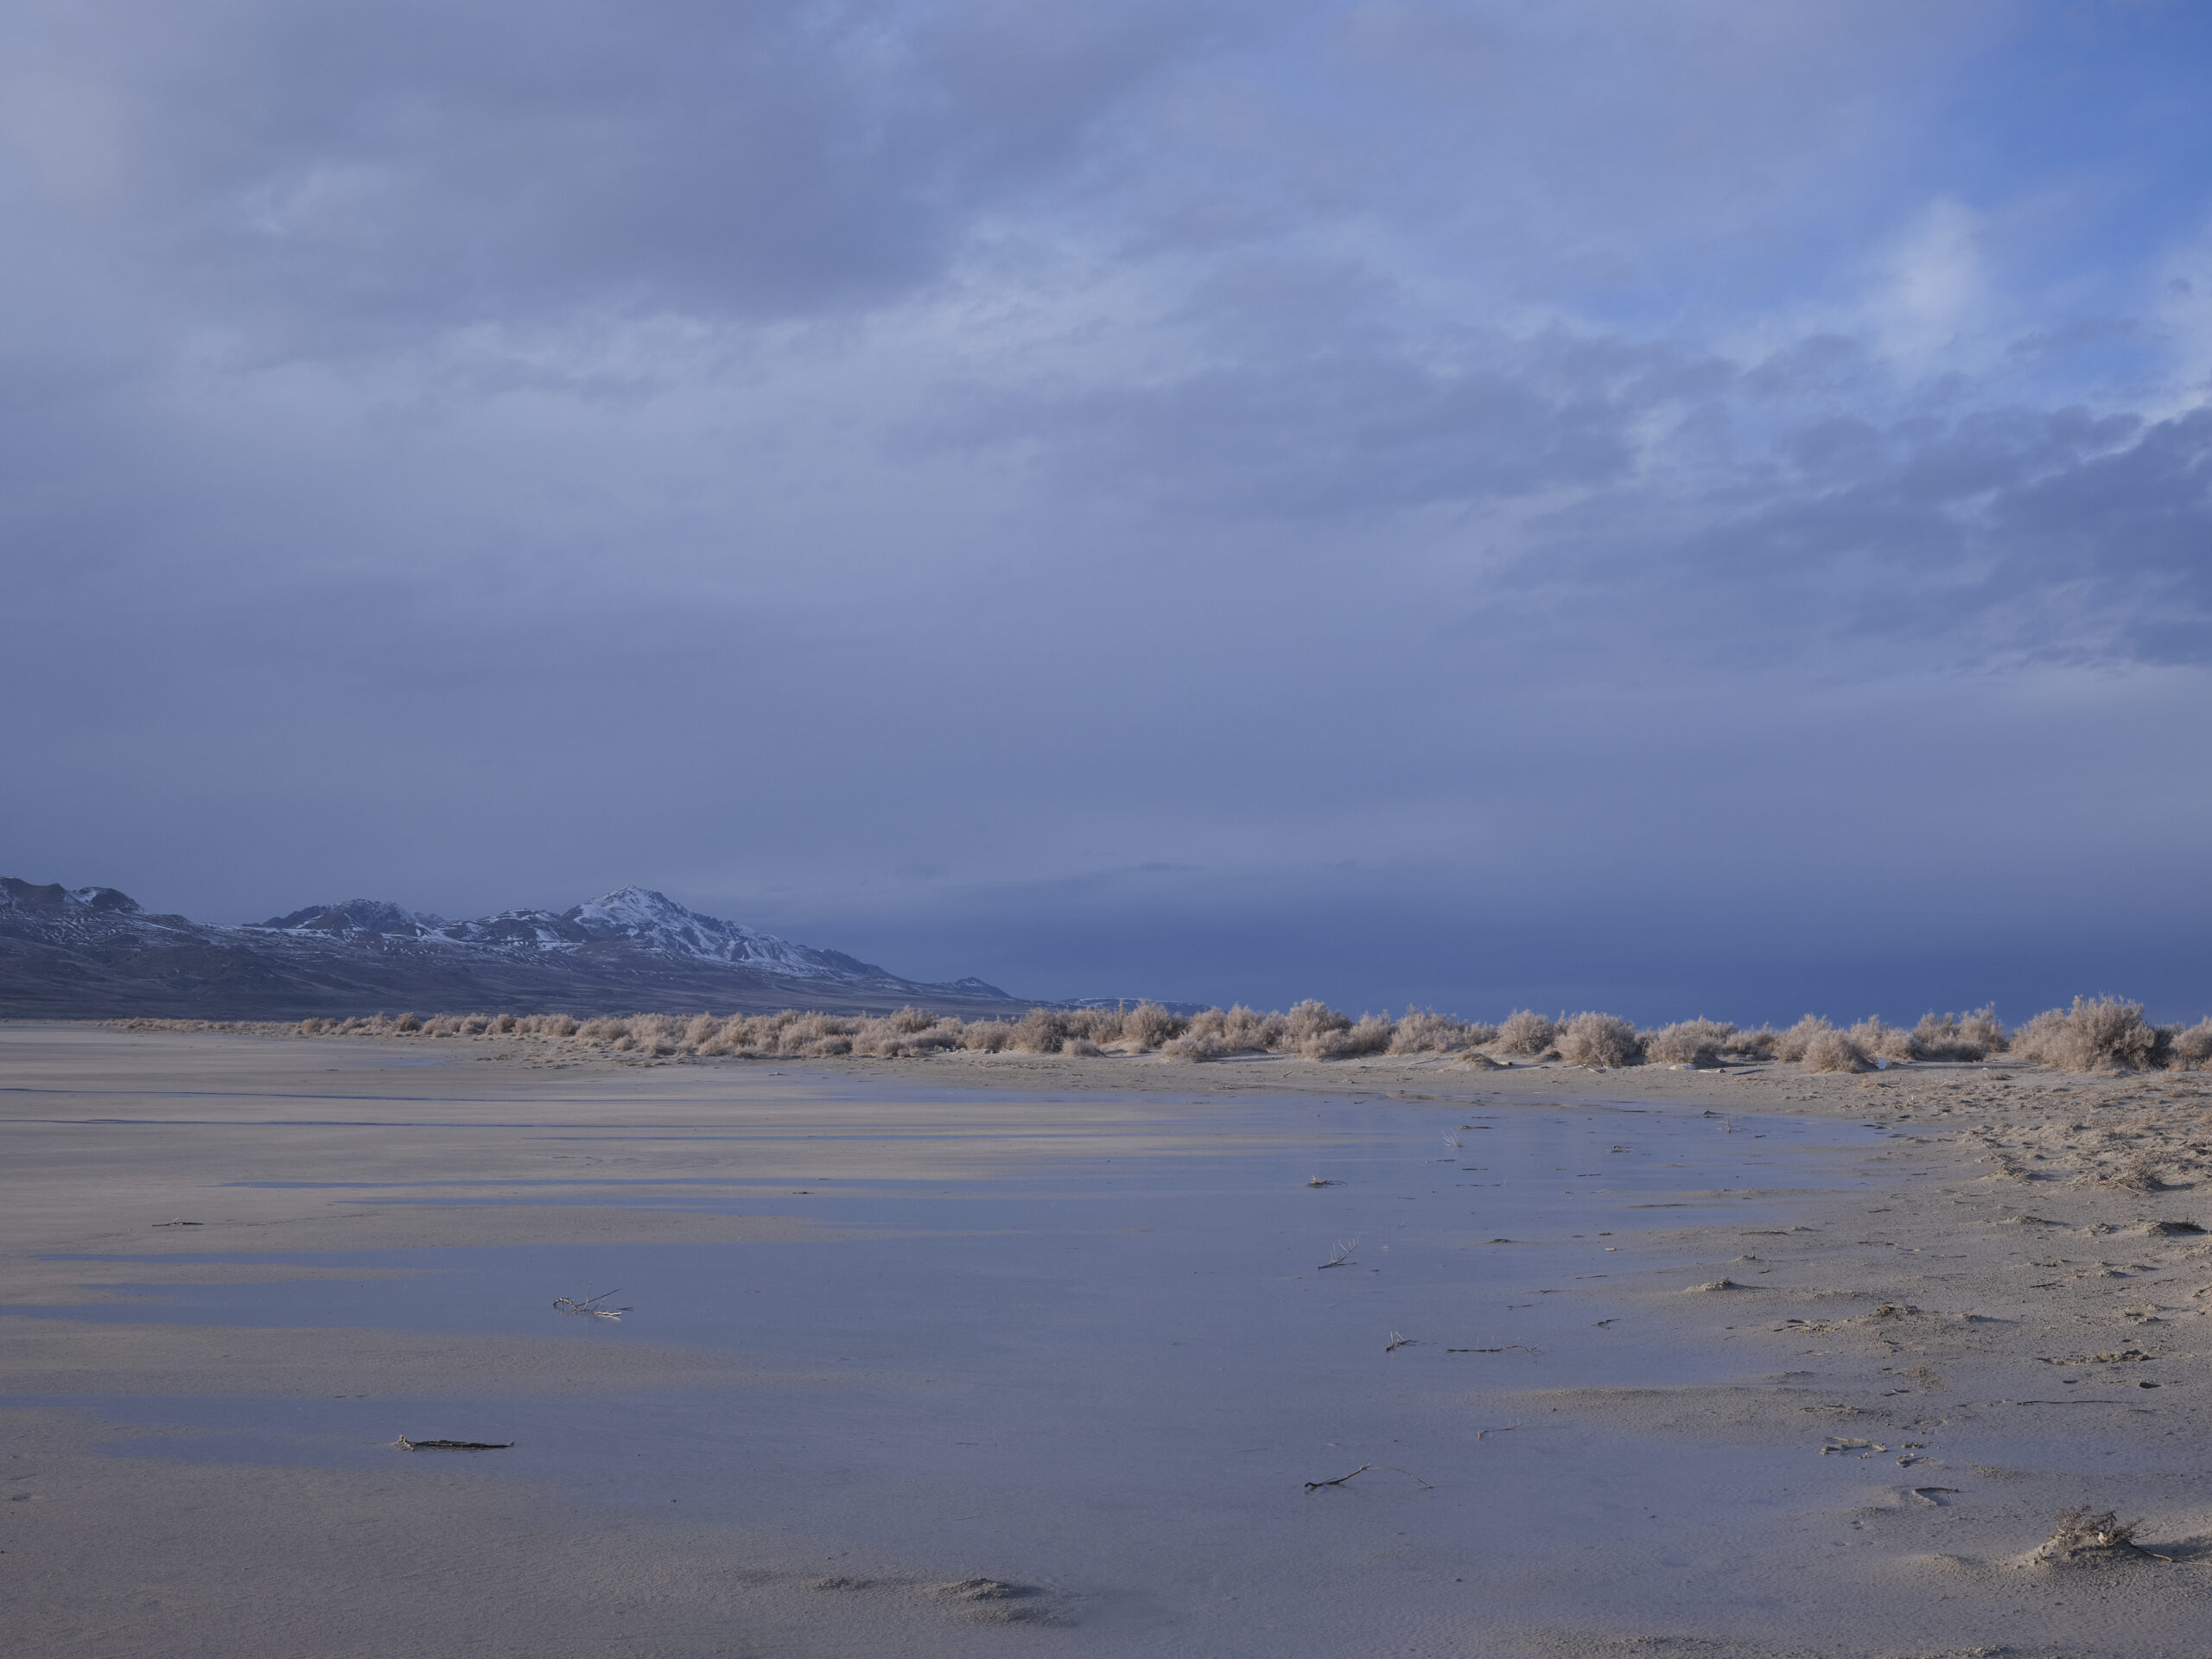 Farmers accused of drying up the imperiled Great Salt Lake say they can help save it